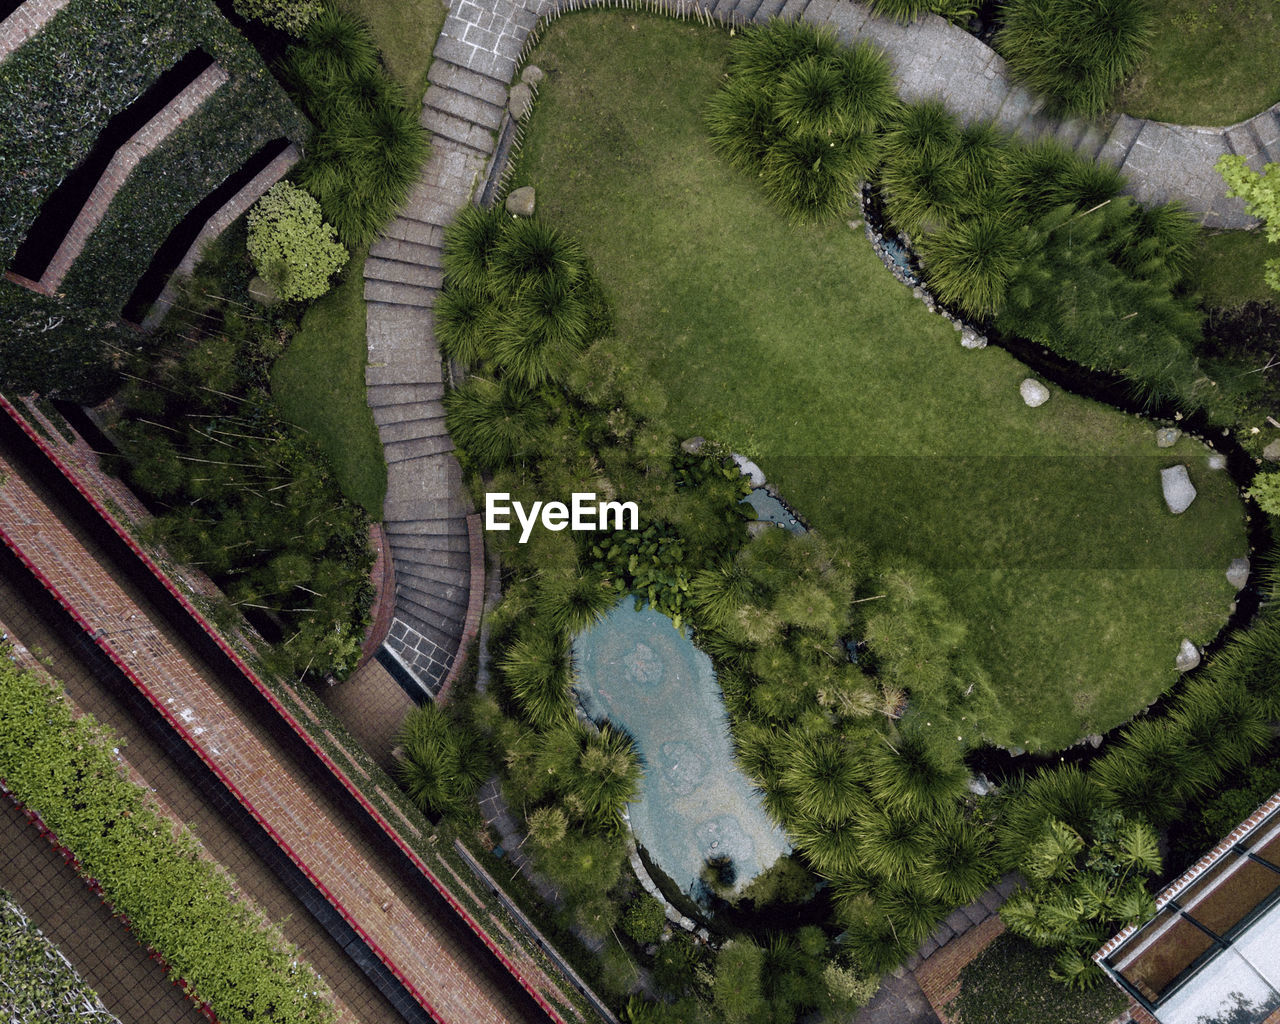 Drone view of trees and plants in park